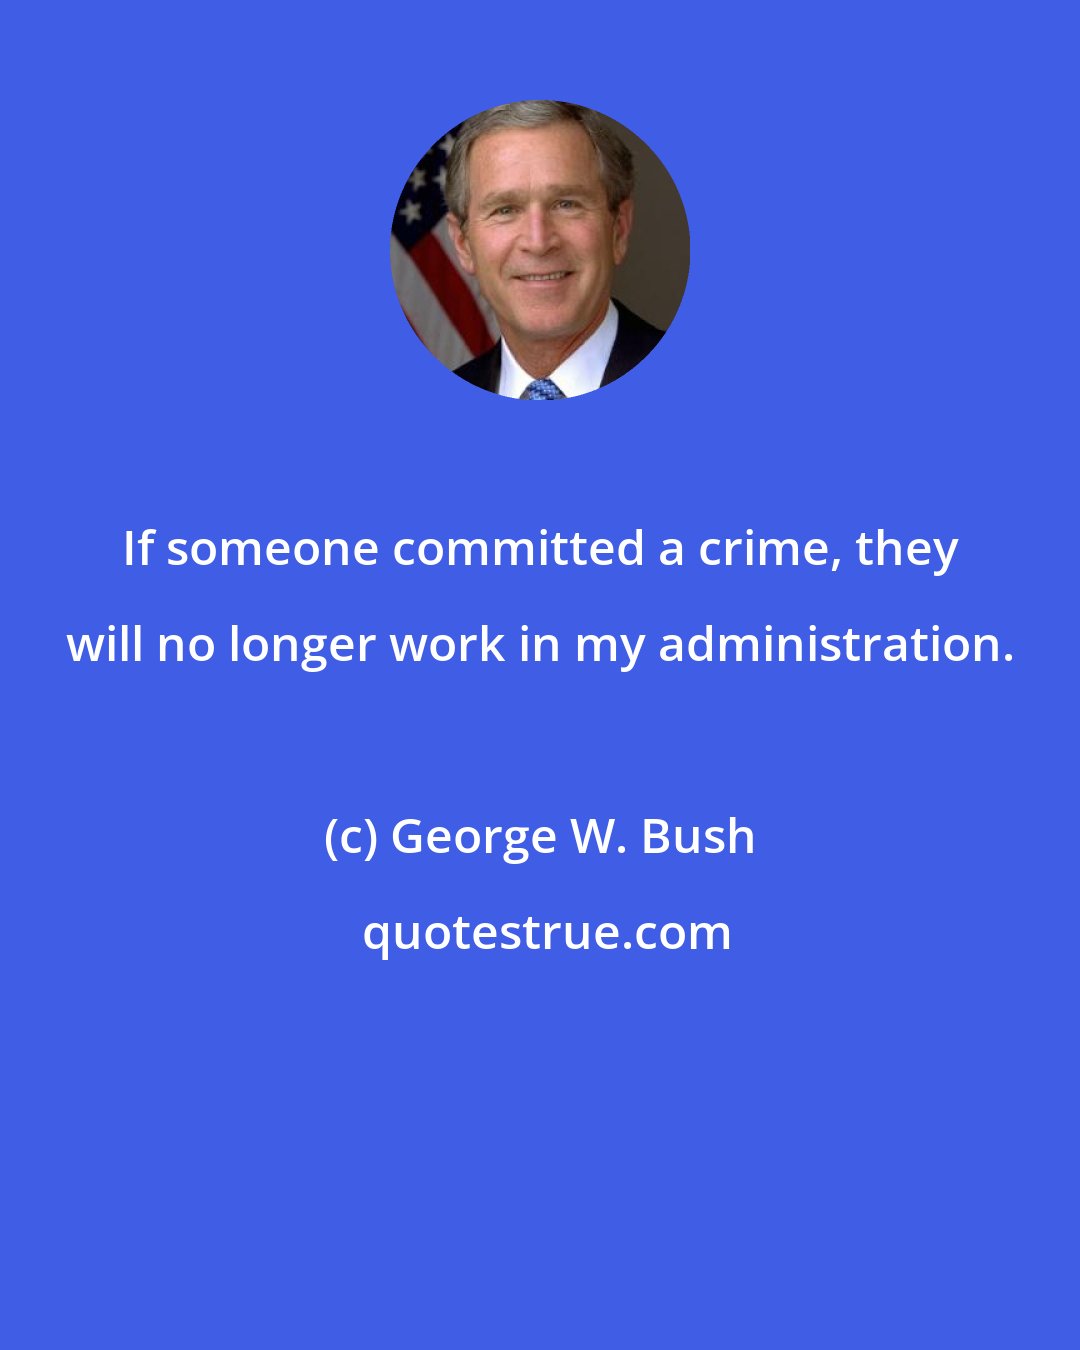 George W. Bush: If someone committed a crime, they will no longer work in my administration.